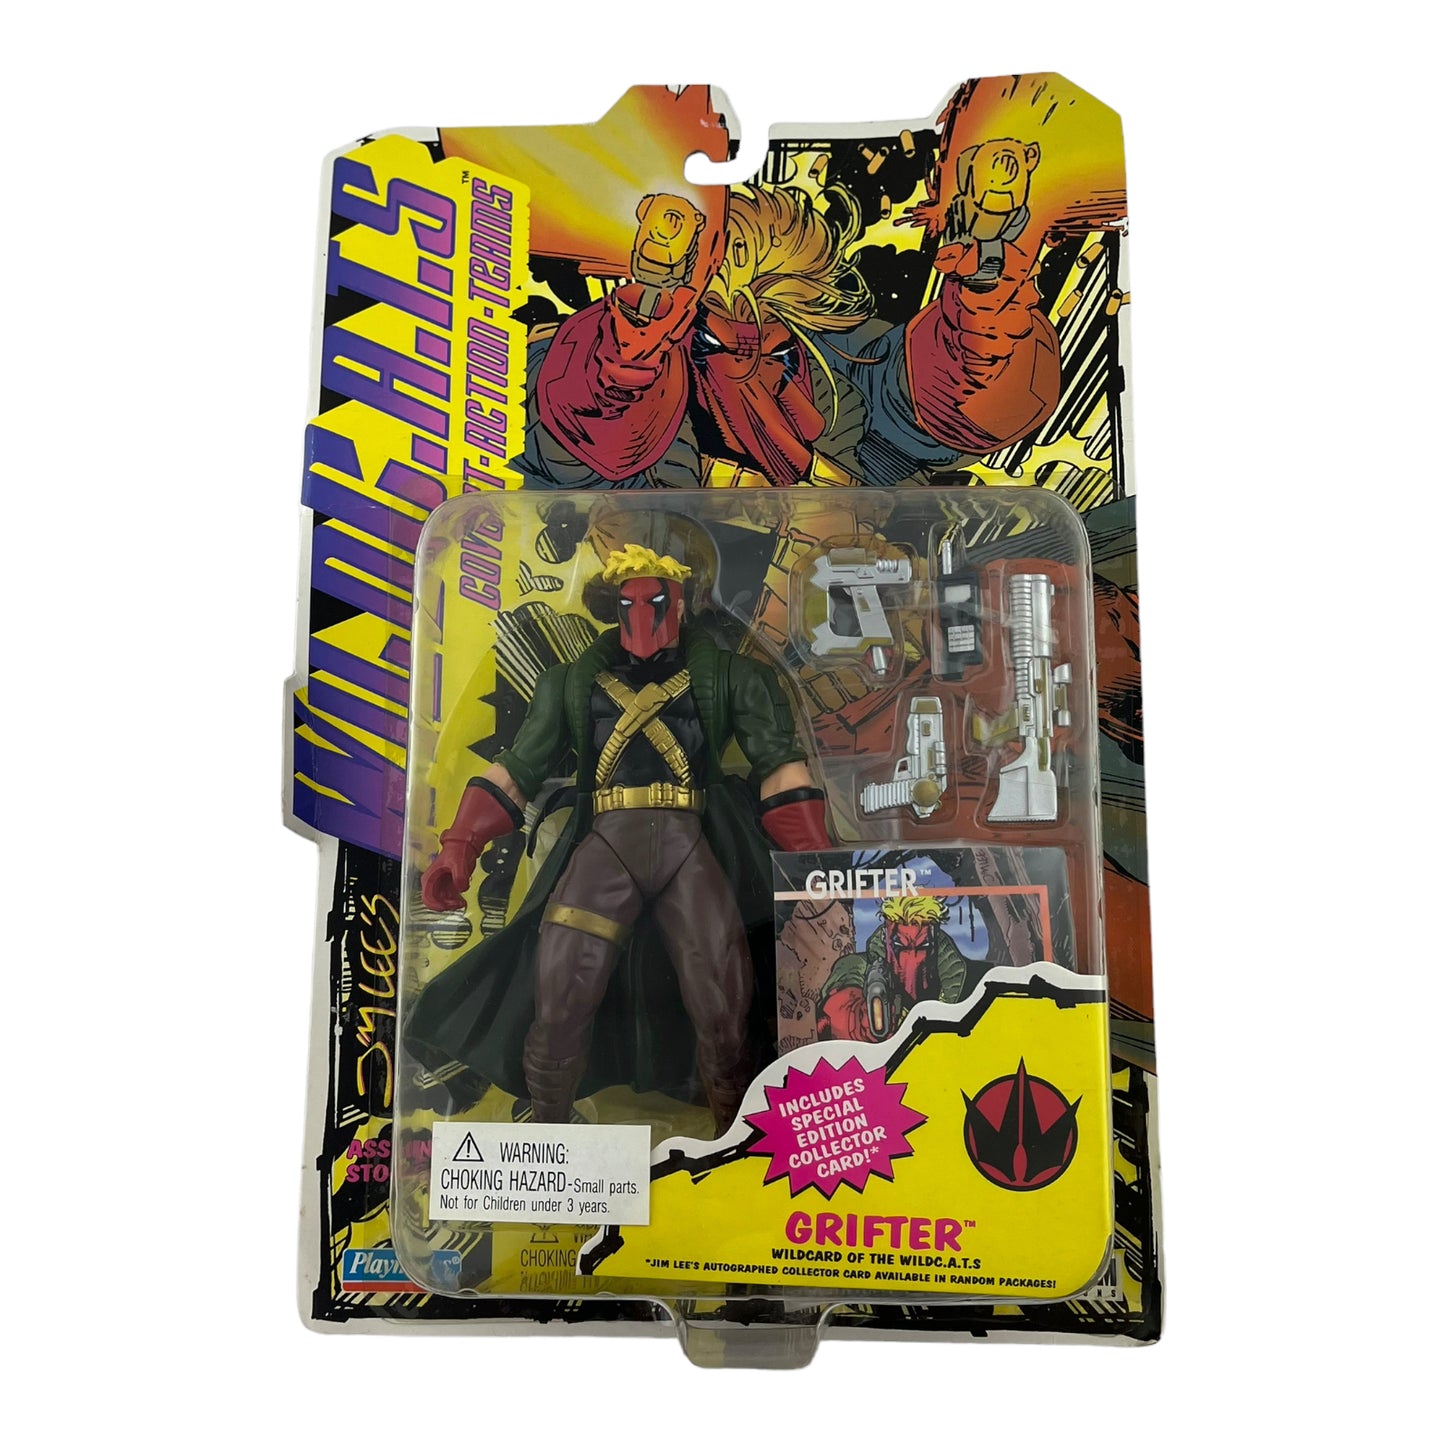 Wildcats Grifter 4.5 Inch Vintage Action Figure 1995 Playmates